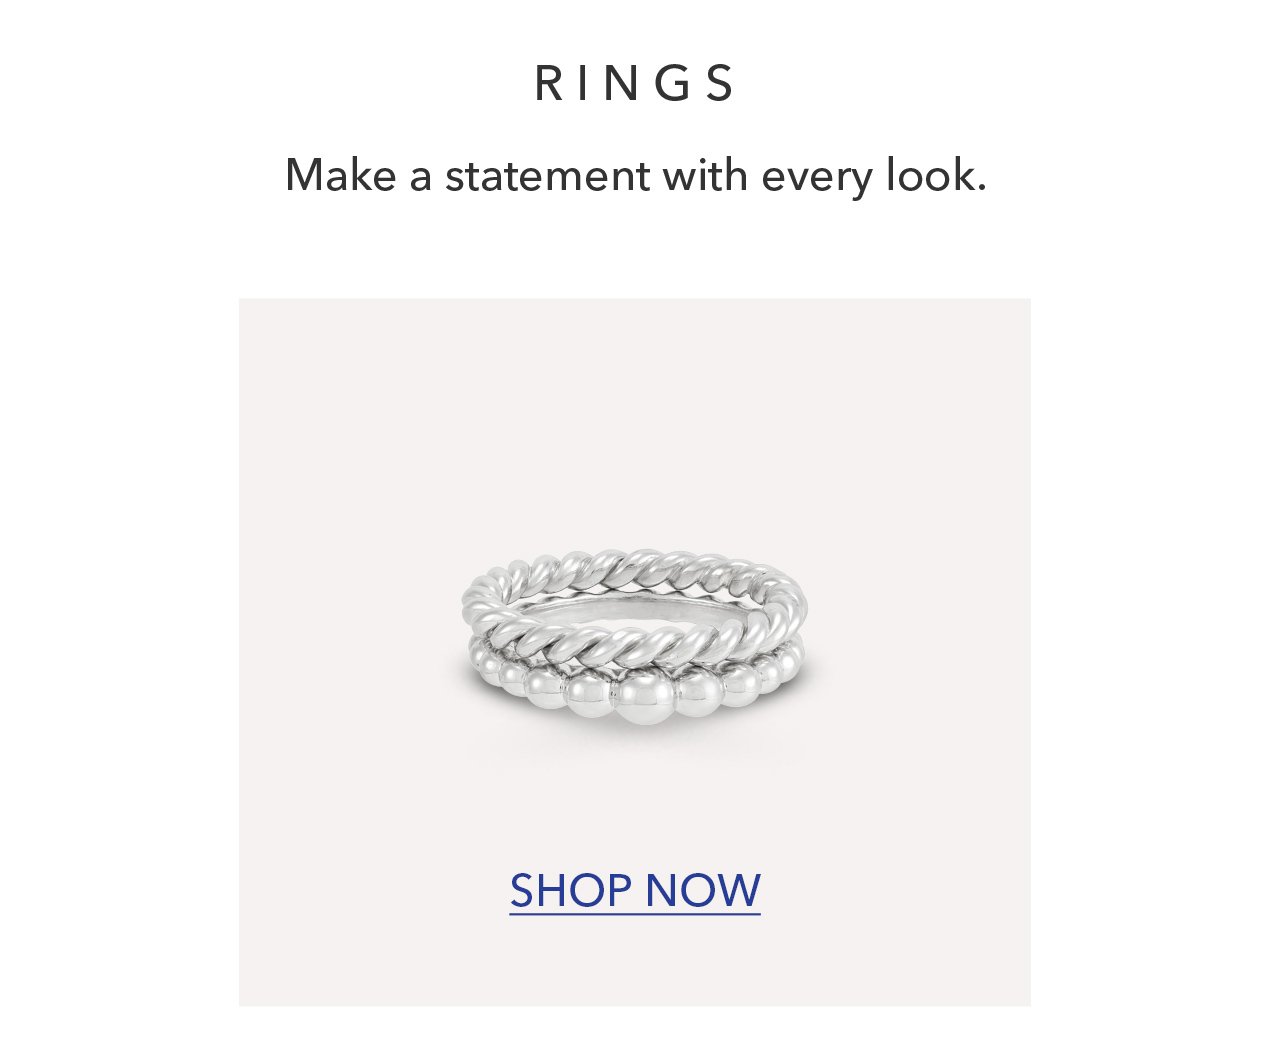 RINGS | Make a statement with every look. SHOP NOW